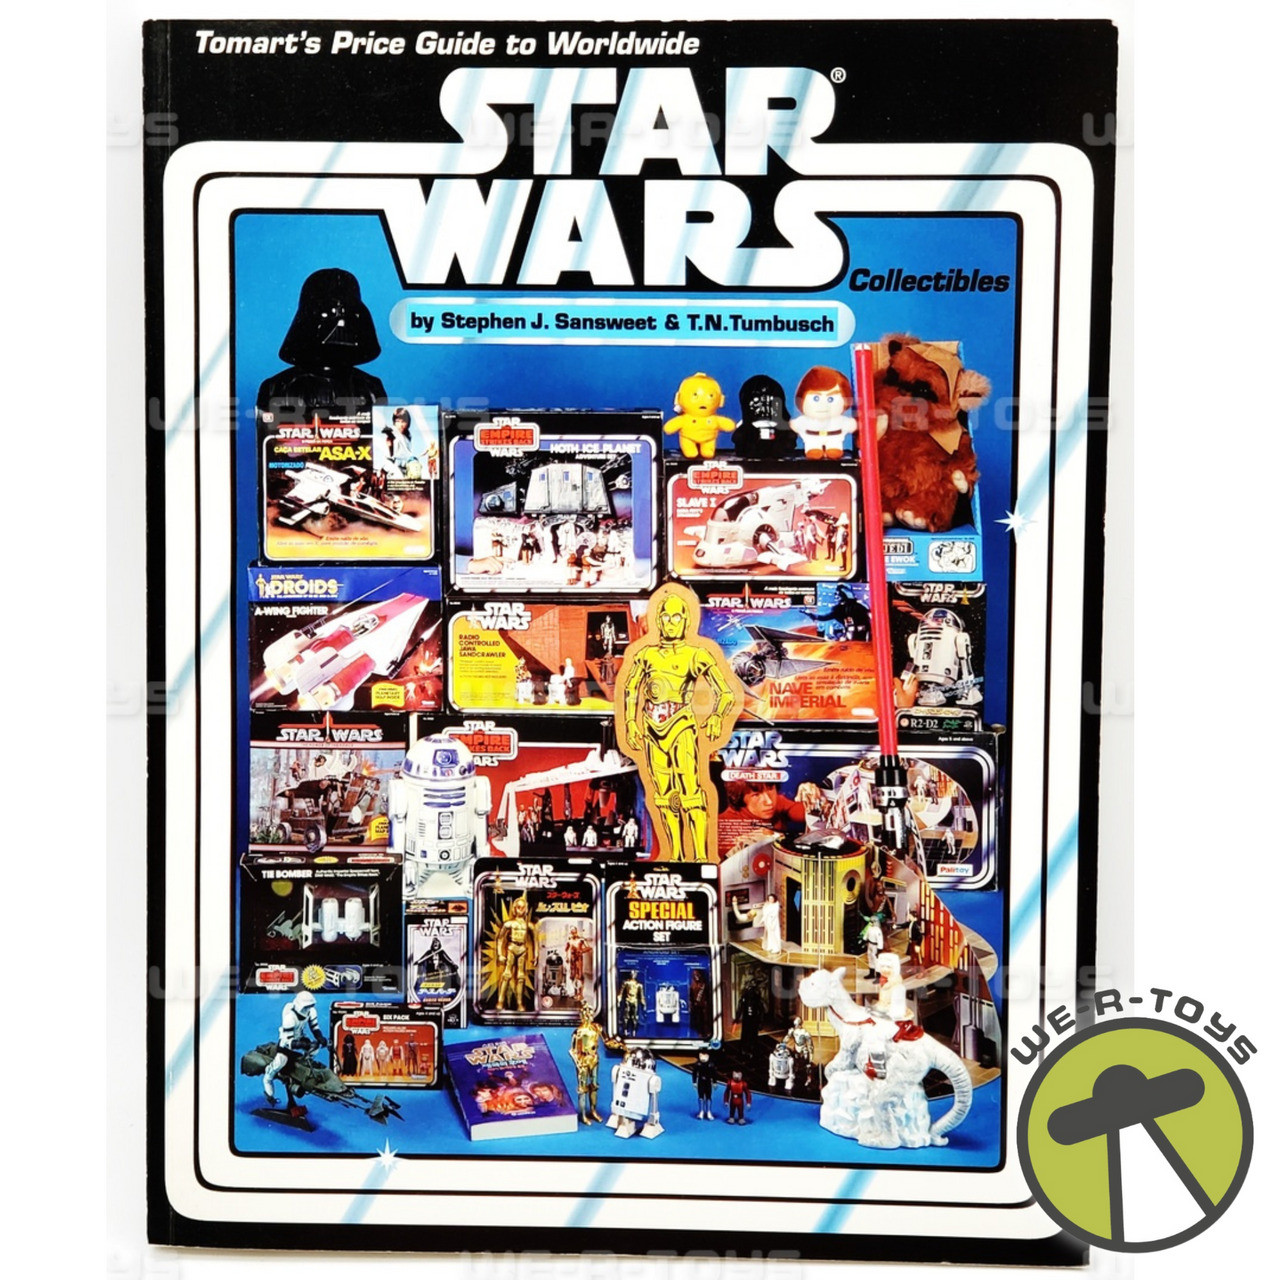 https://cdn11.bigcommerce.com/s-cy4lua1xoh/images/stencil/1280x1280/products/29674/272571/star-wars-tomarts-price-guide-to-worldwide-star-wars-collectibles-signed-1994-used__22811.1694018856.jpg?c=1